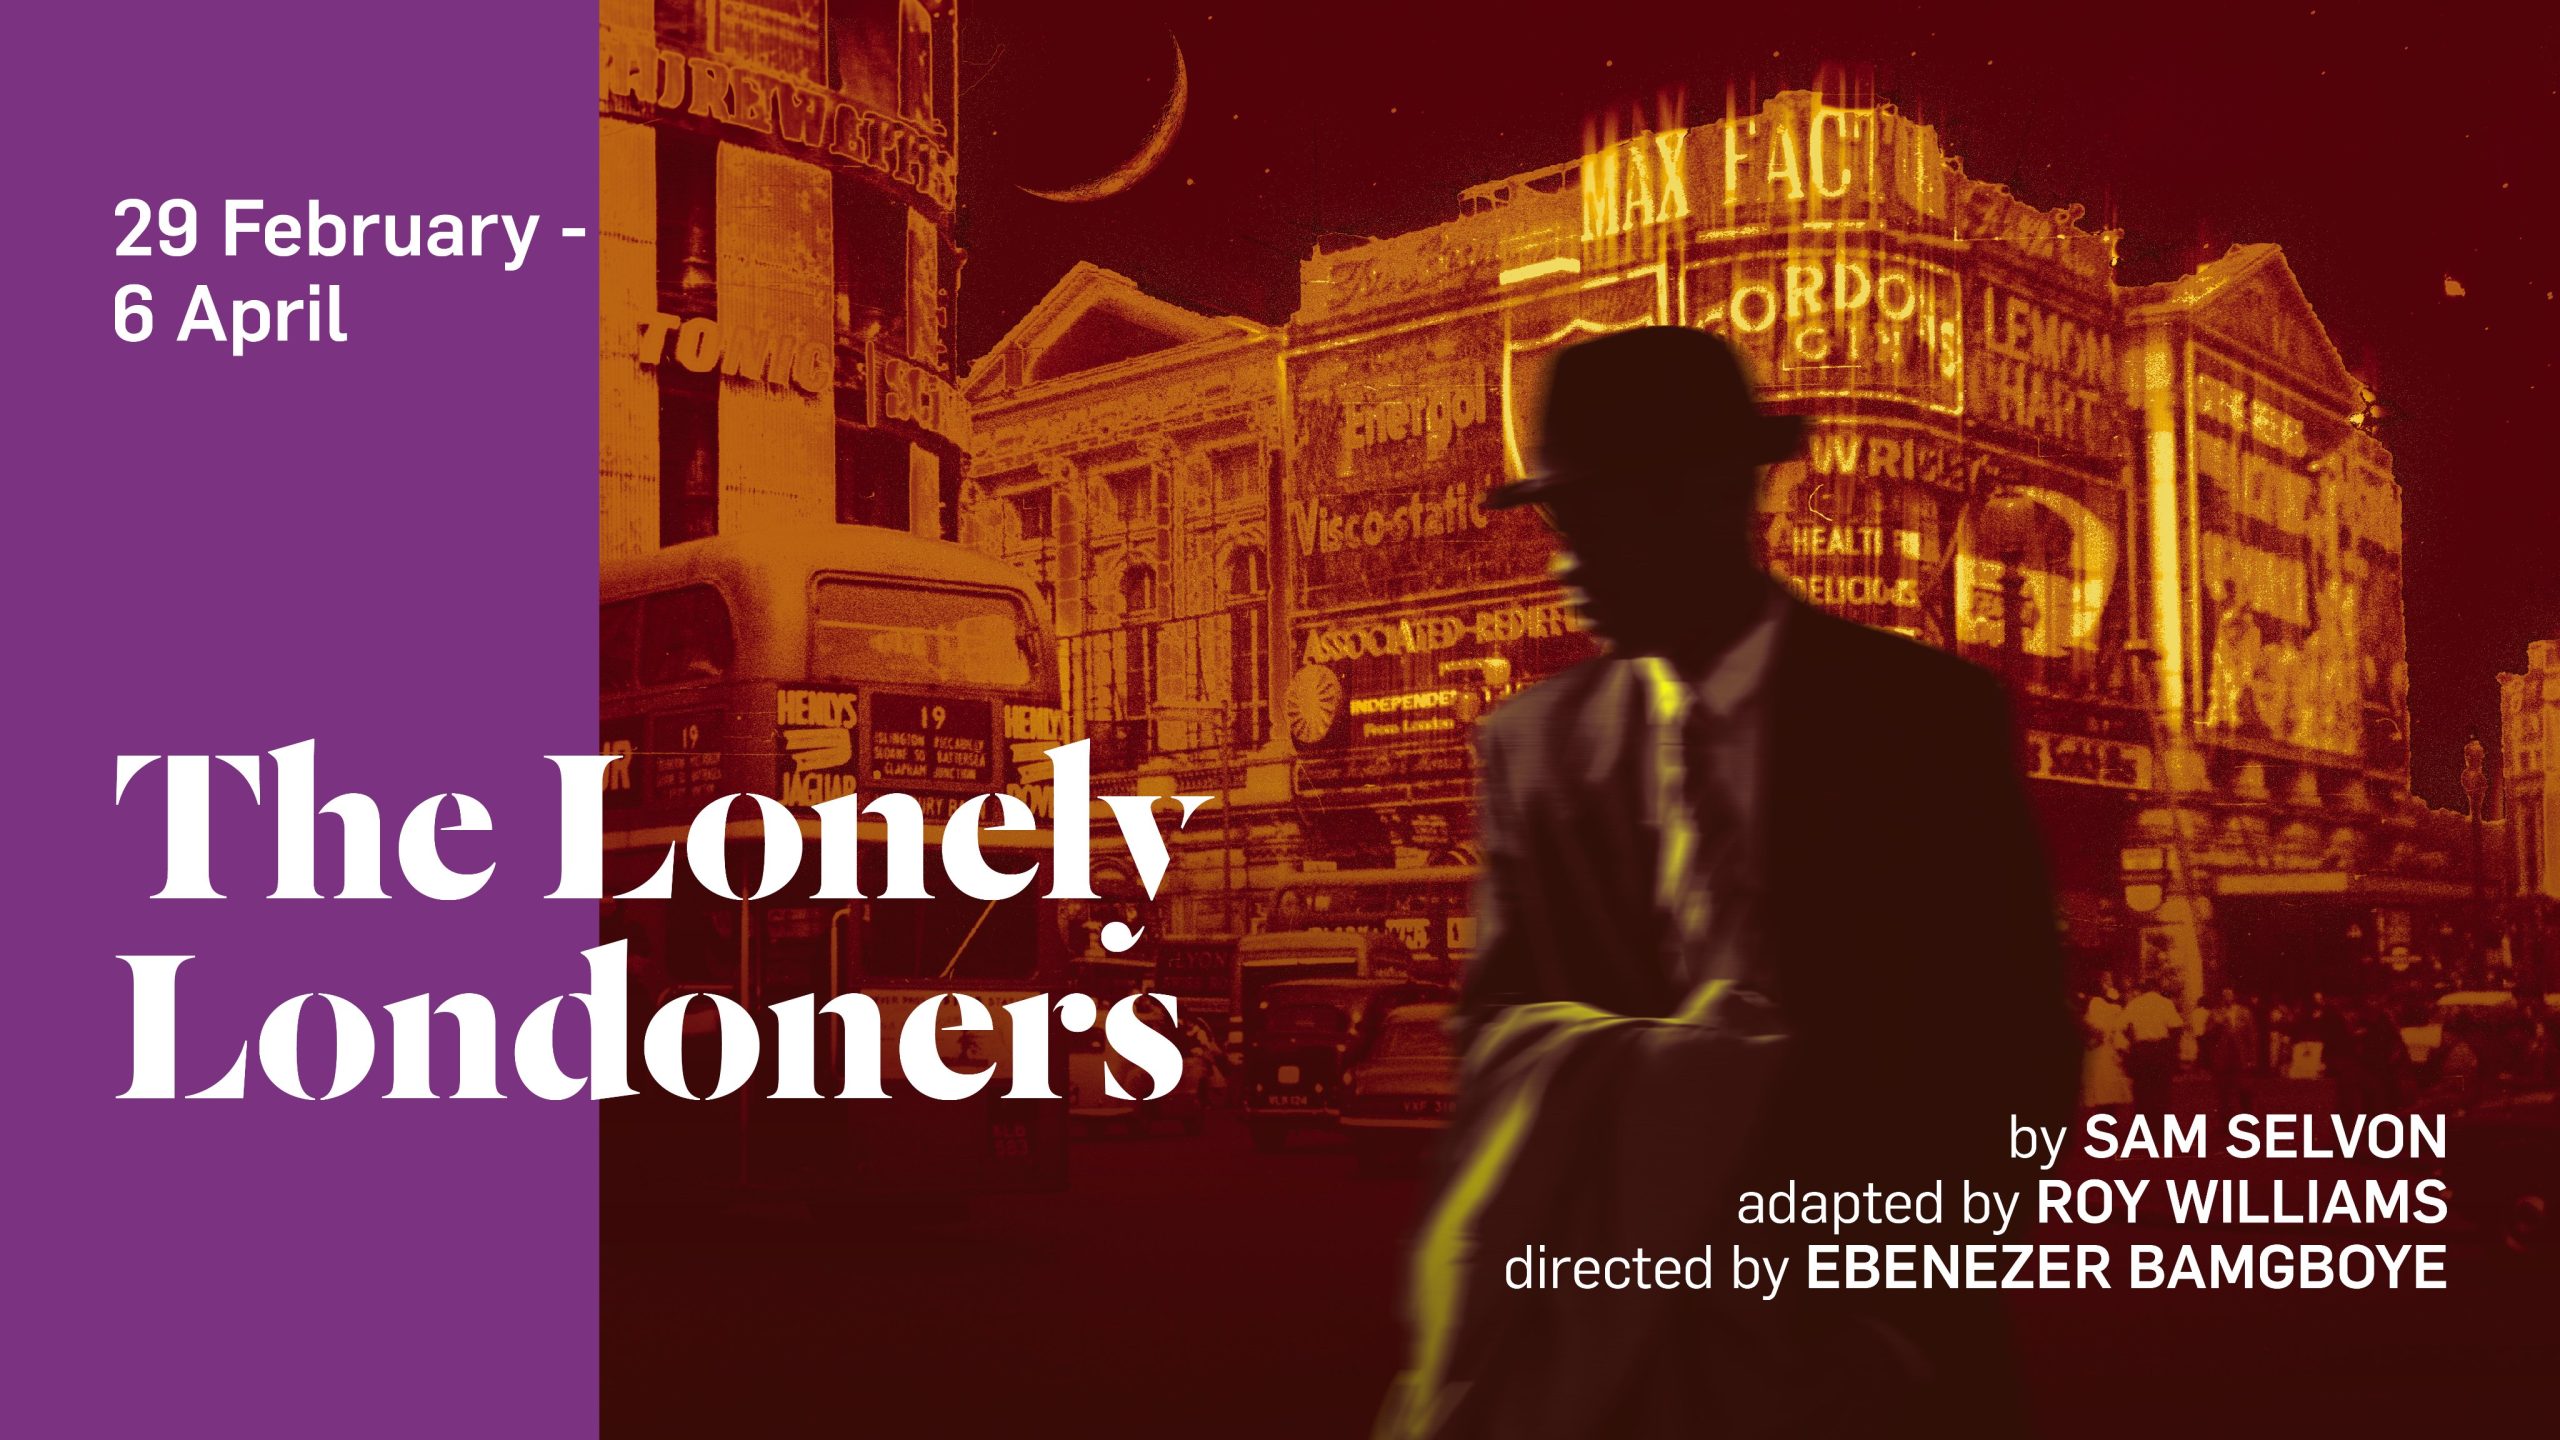 The Lonely Londoners by Sam Selvon
Adapted by Roy Williams